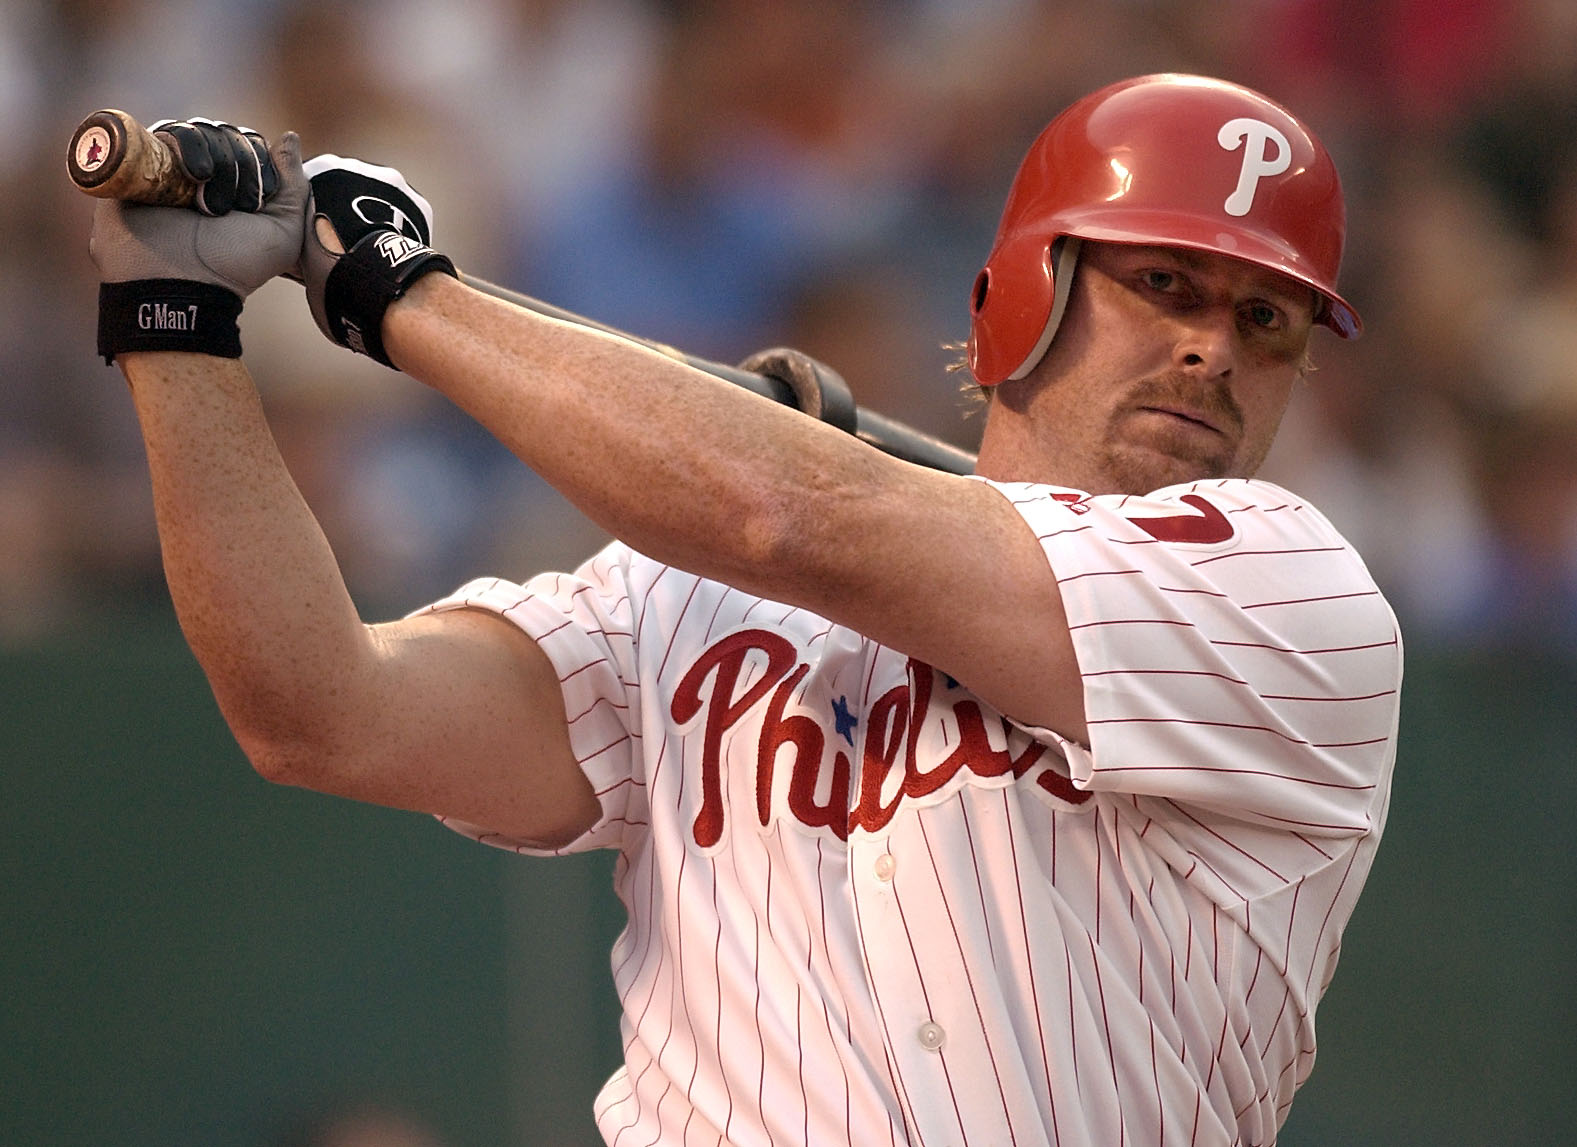 Jeremy Giambi, younger brother of Jason Giambi, dies at 47